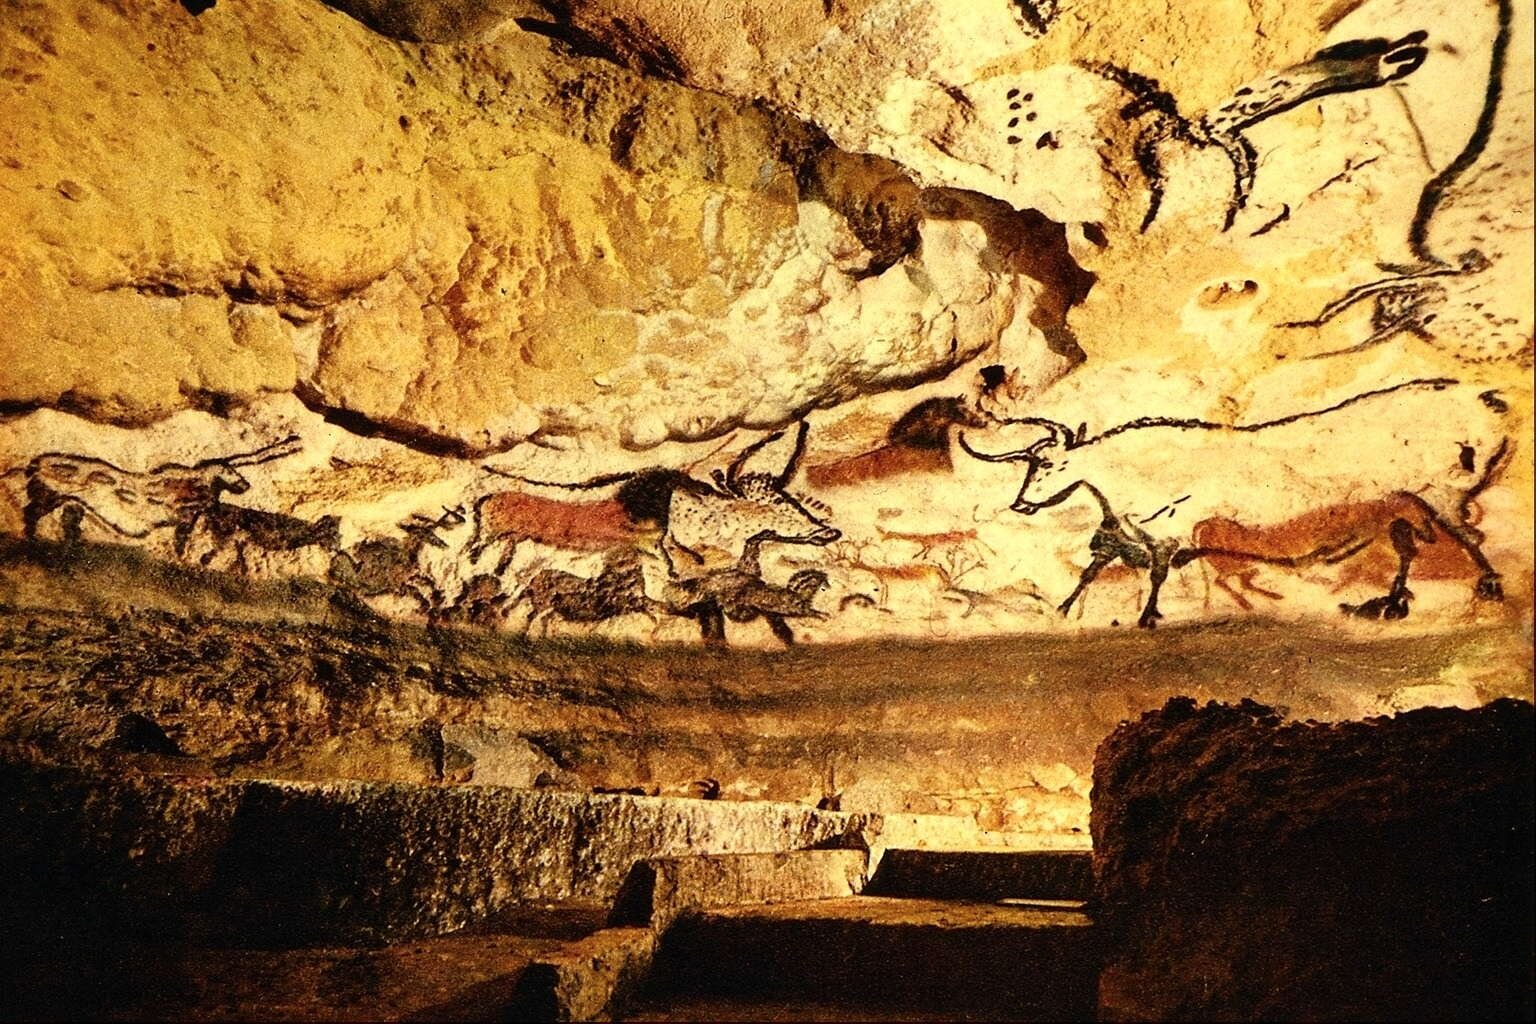  Cows, horses, and bulls painted in black lines on a cave wall 